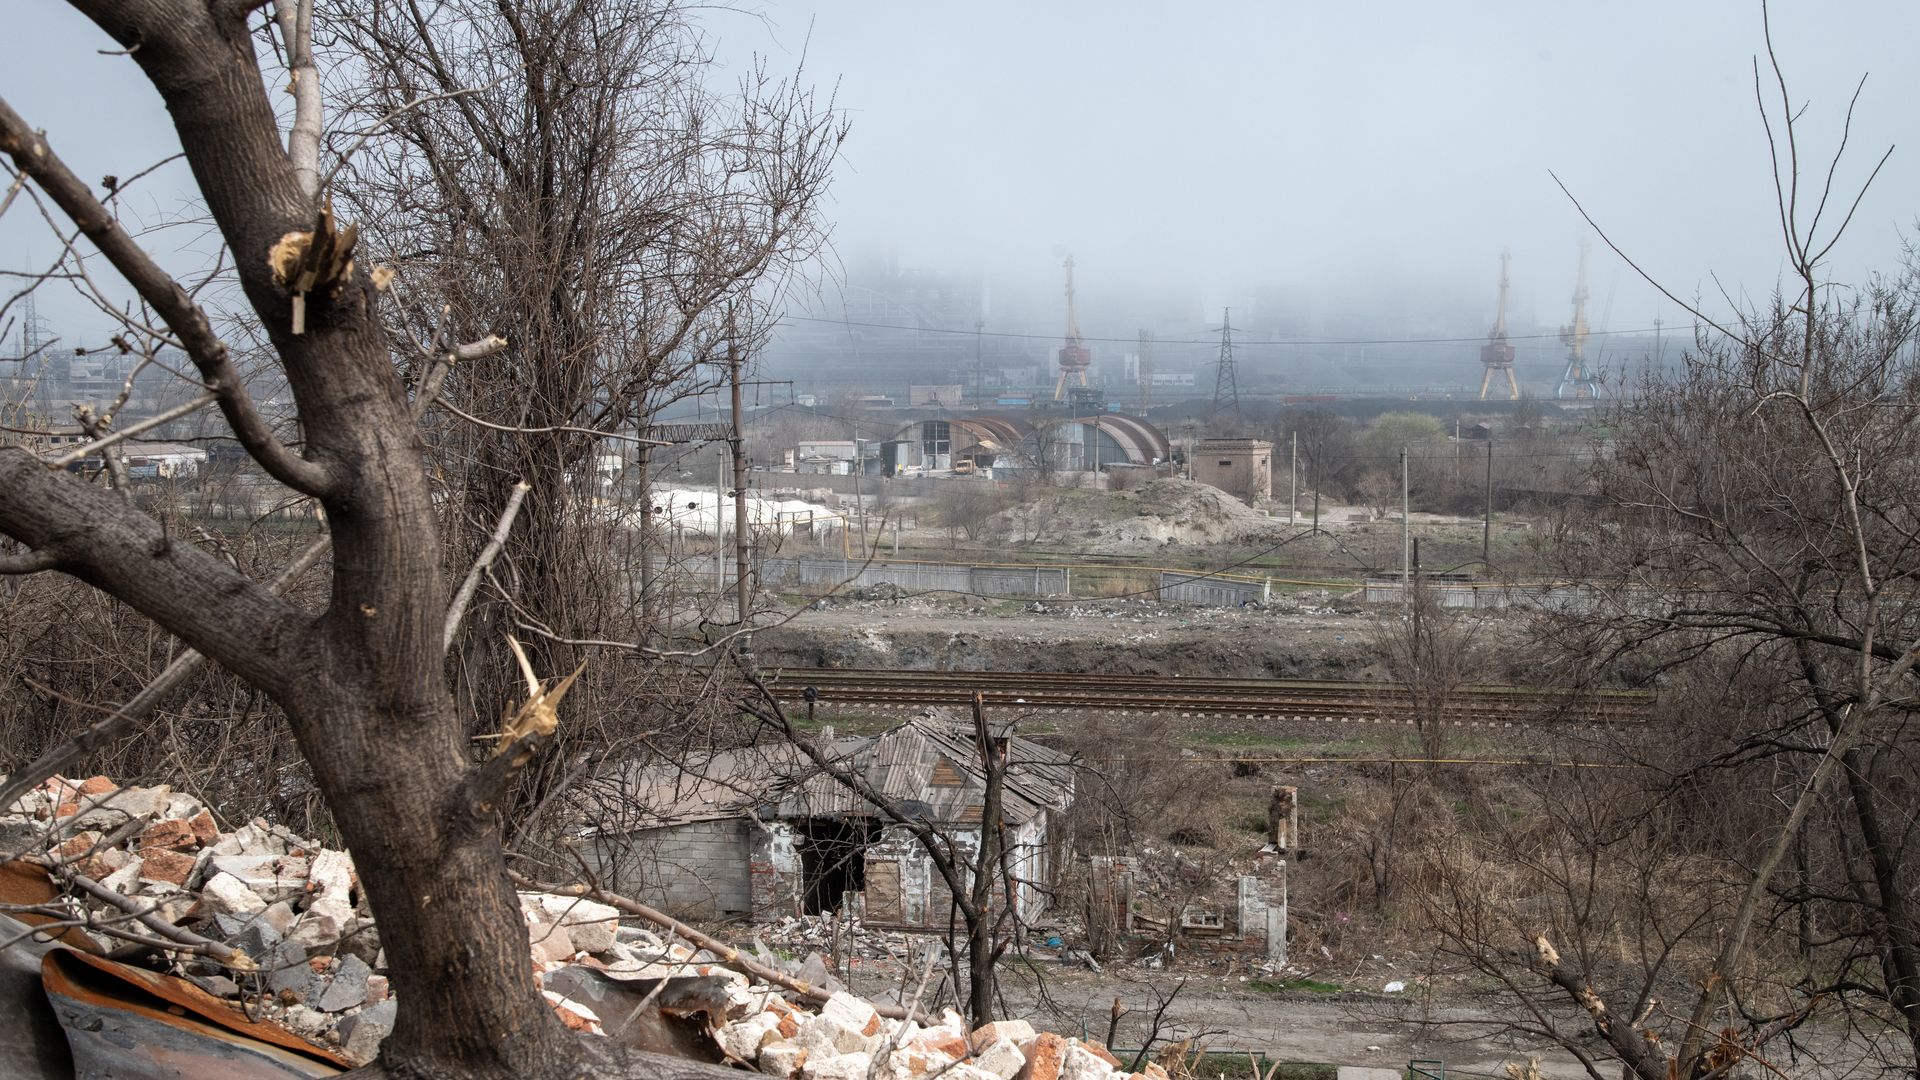 The Azovstal steel plant in Mariupol on April 9.